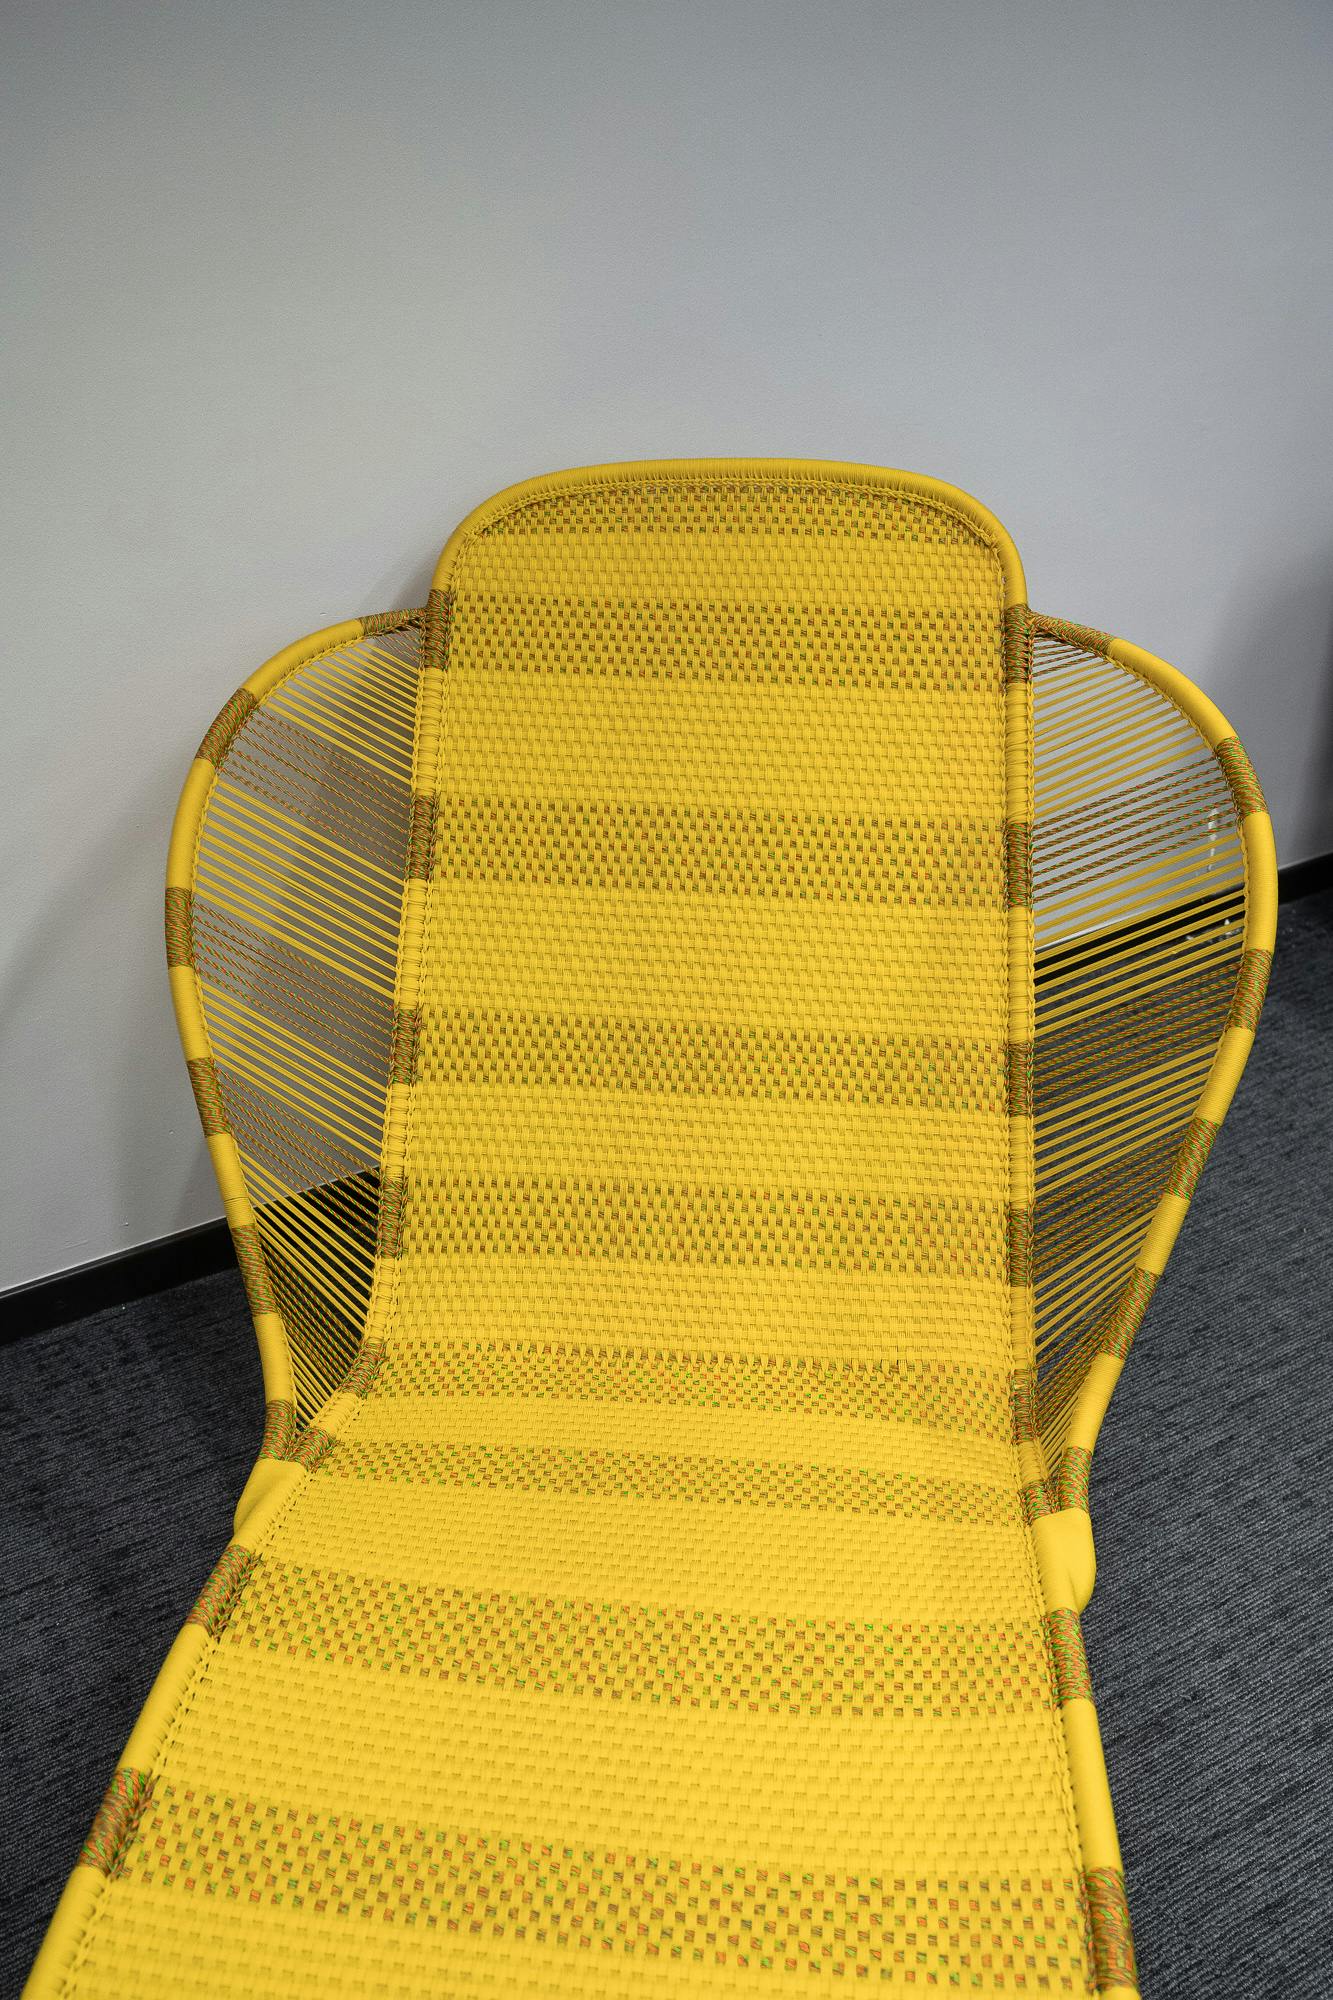 Transat / Long chair yellow woven MOROSO - Second hand quality "Chairs" - Relieve Furniture